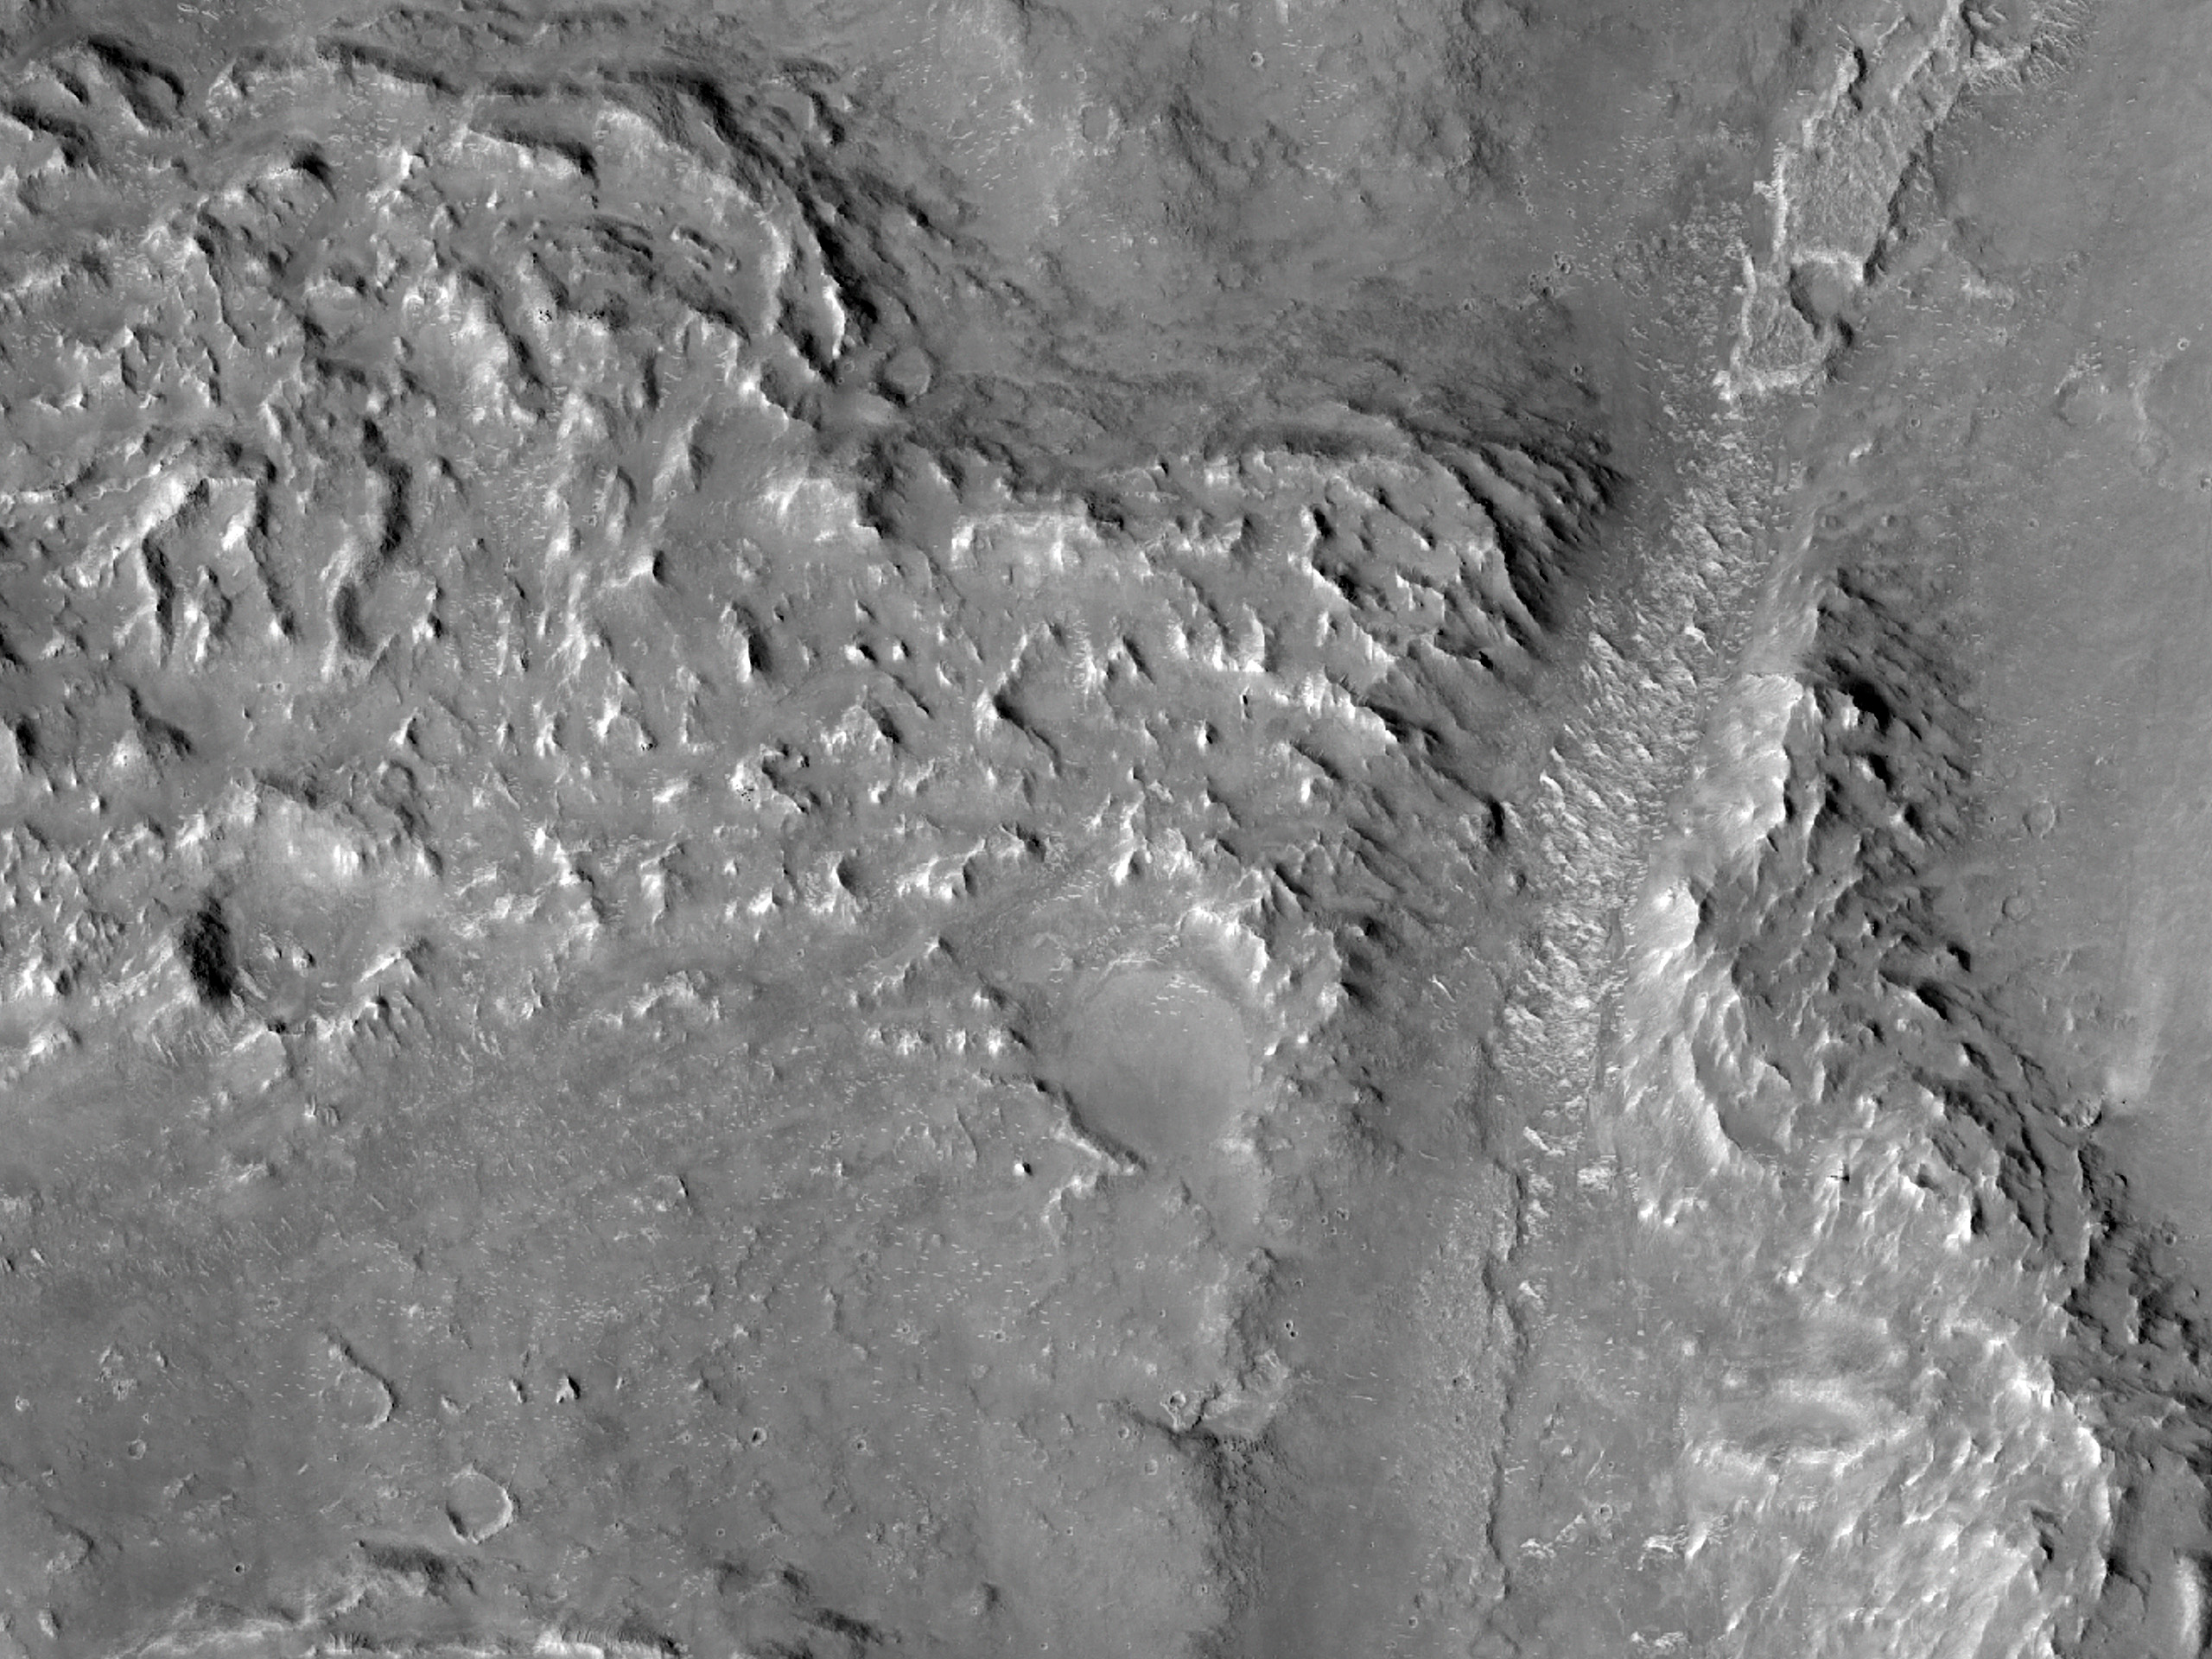 Valley Cutting Ejecta of Crater and Associated Sinuous Ridge